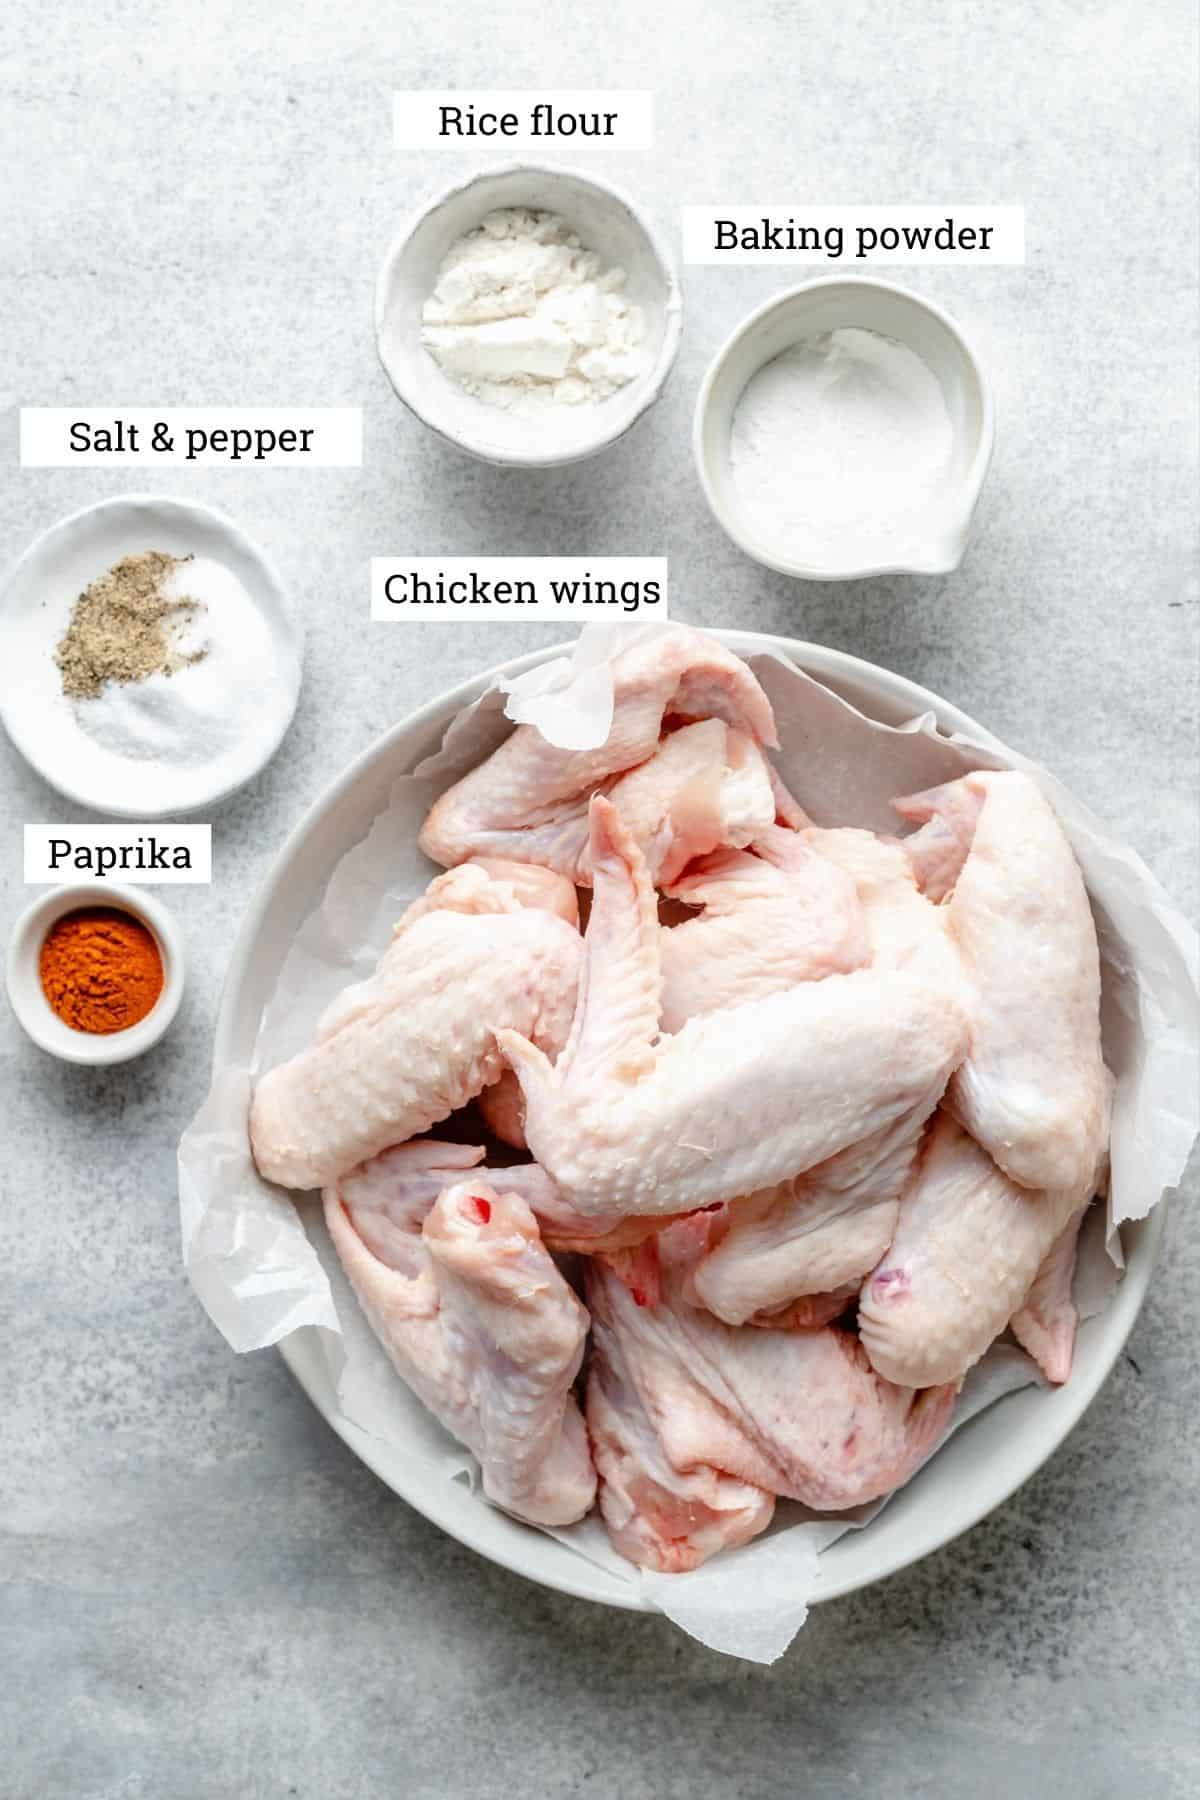 Ingredients for crispy baked chicken wings with baking powder, rice flour, salt & pepper and paprika.